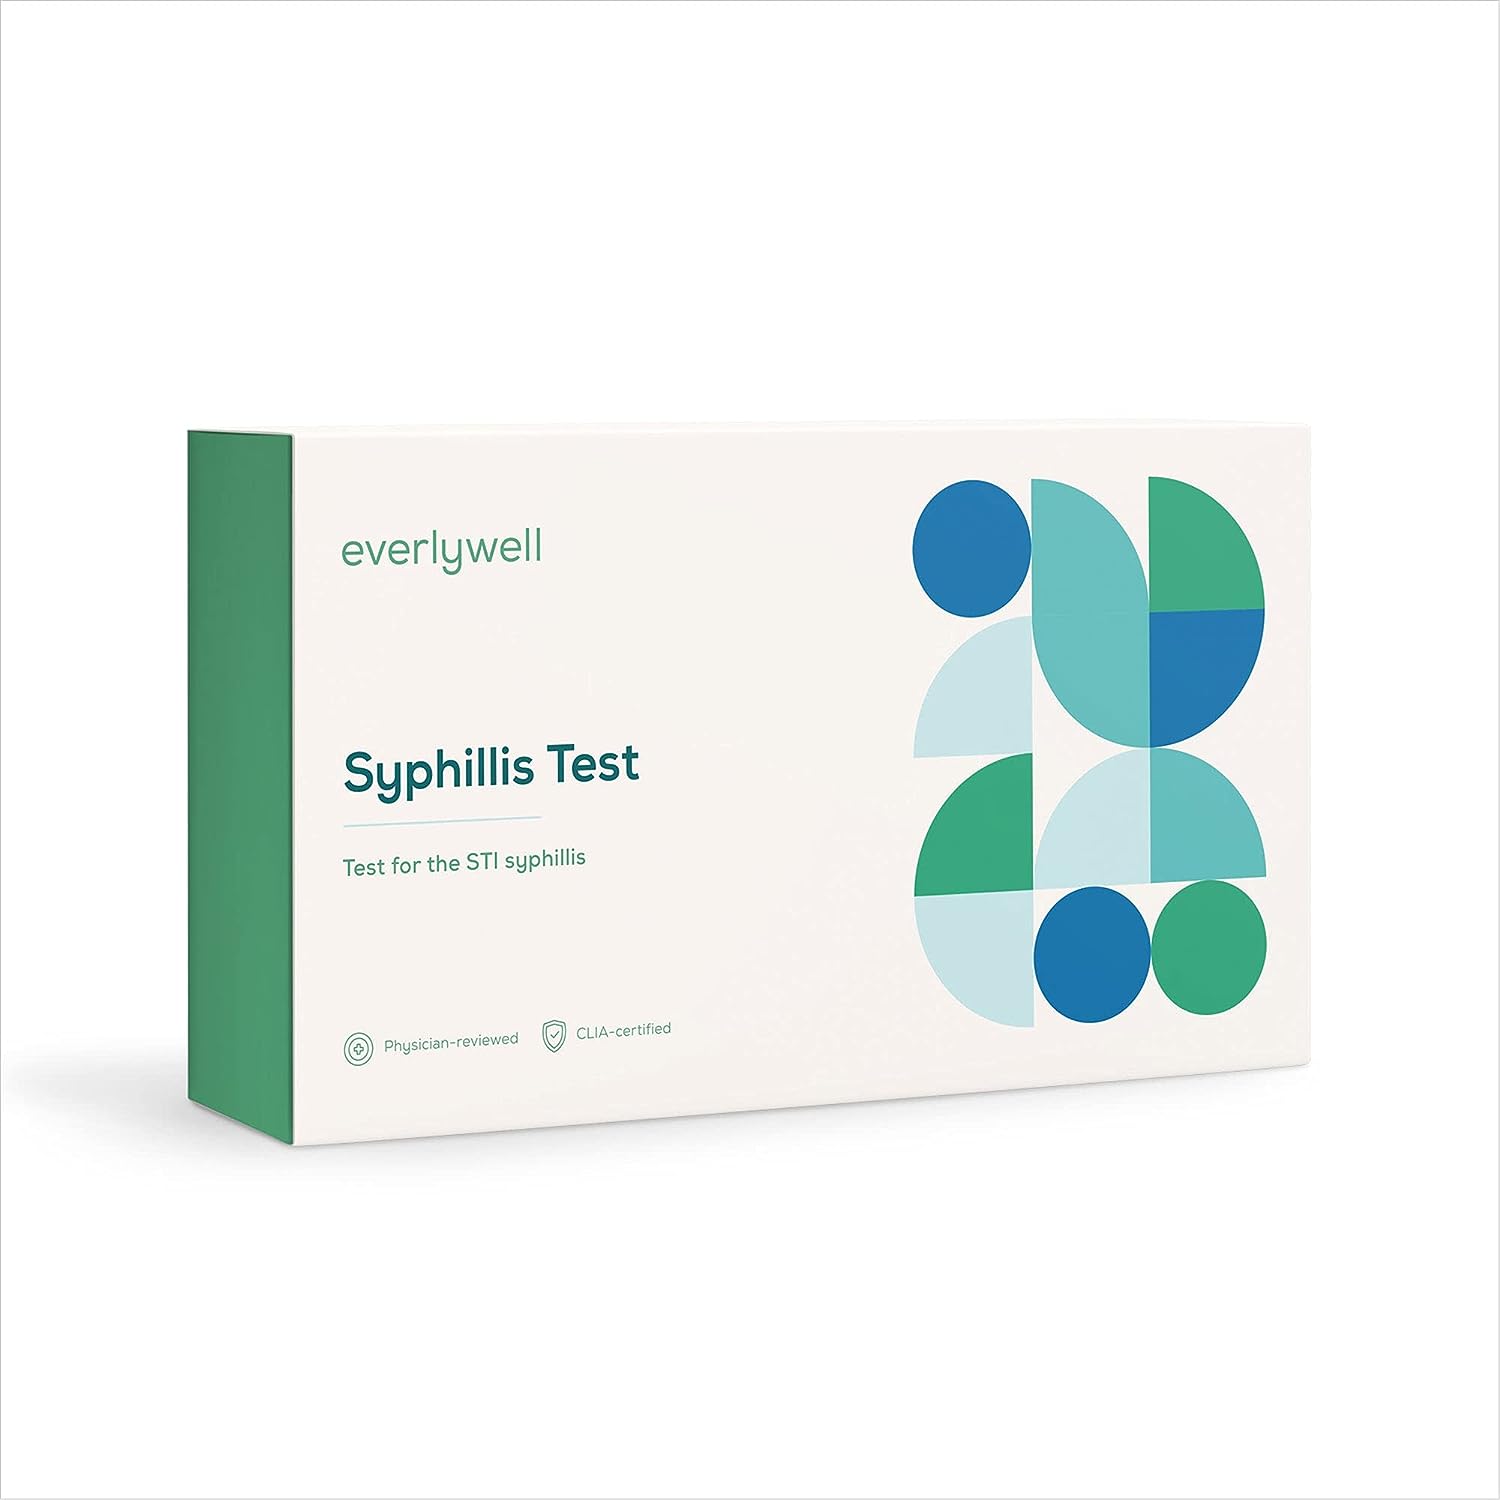 everlywell syphilis test review